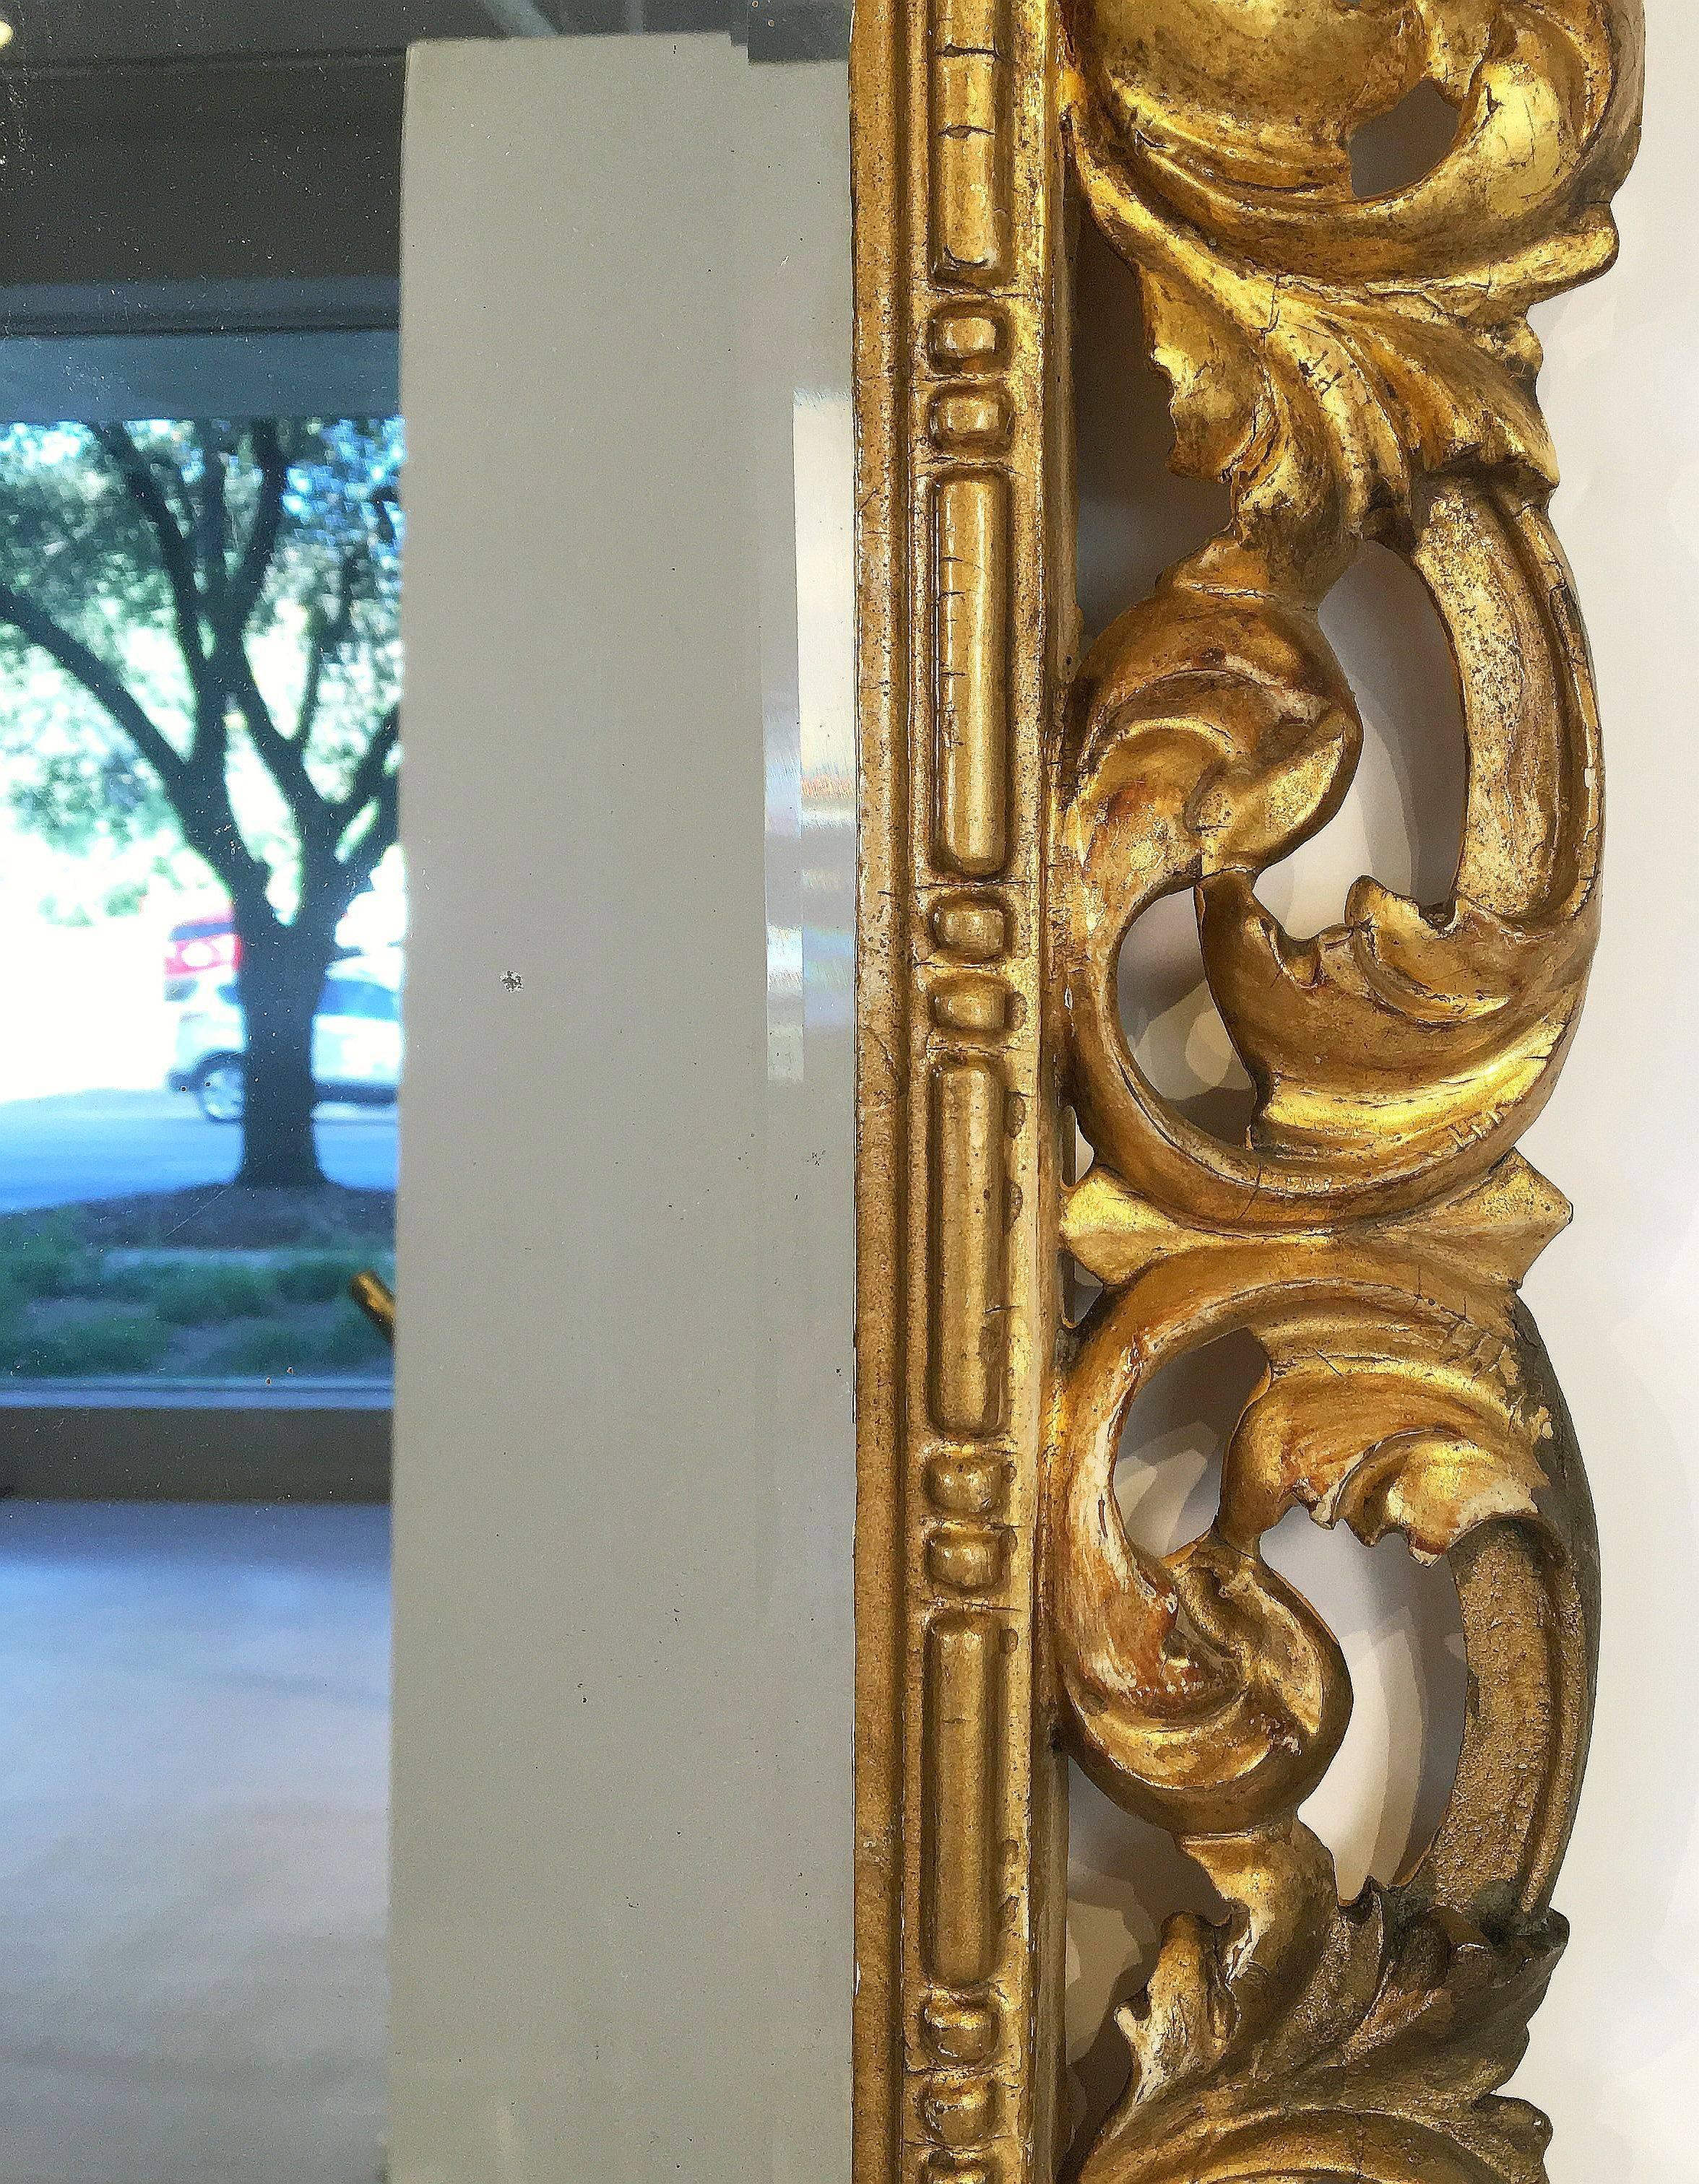 19th Century Rococo Beveled Mirror with Carved Giltwood Frame (H 22 1/2 x W 16 1/2)